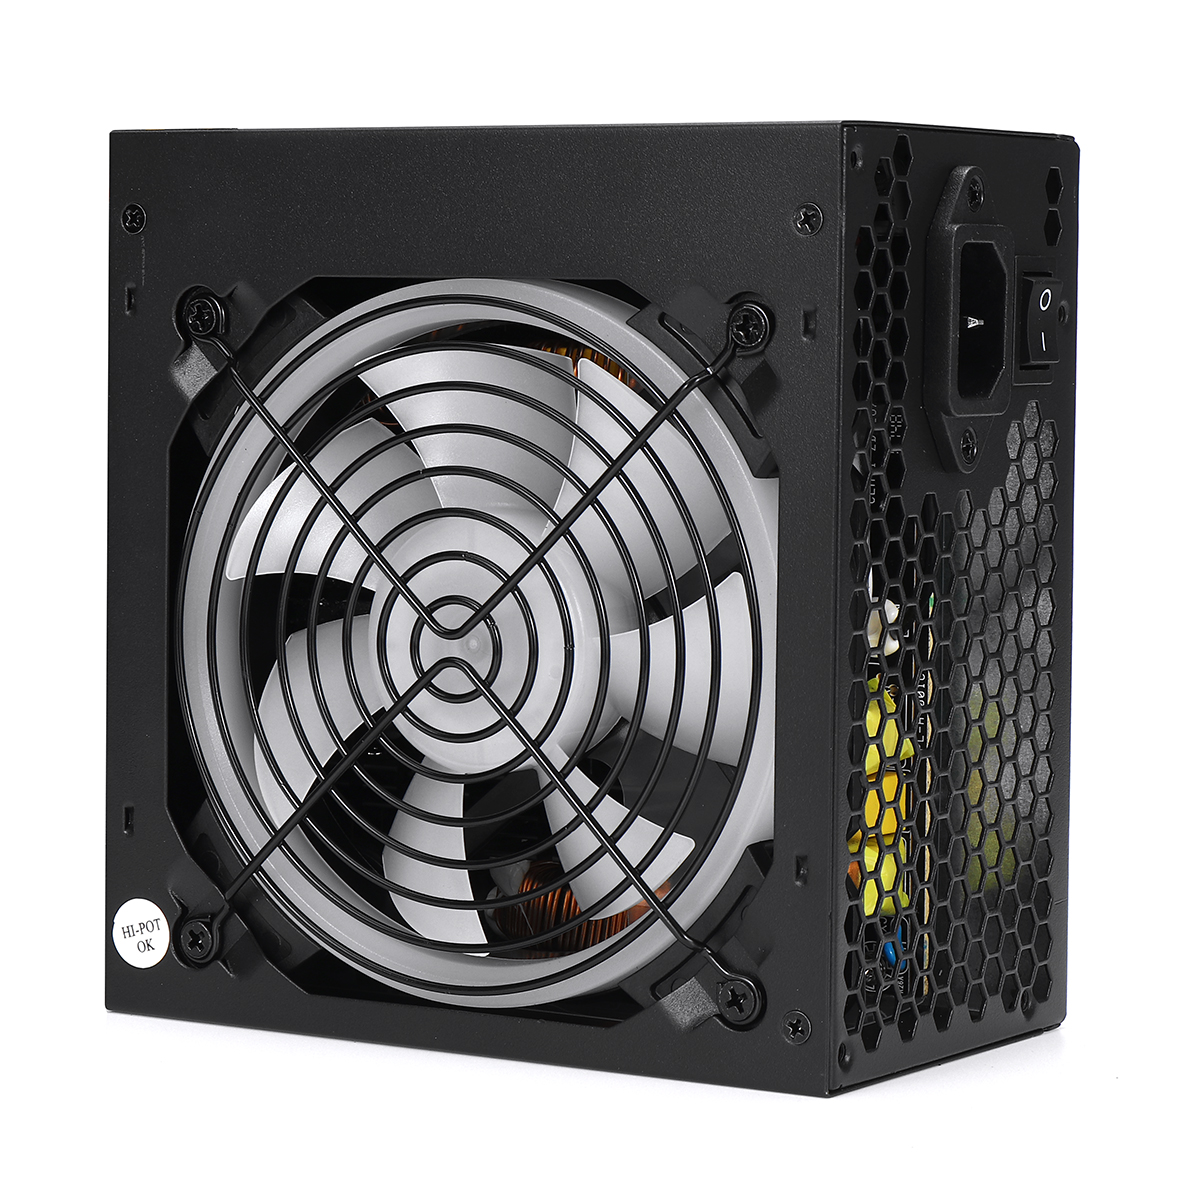 Find 1200W Active PFC PC Power Supply Desktop Computer ATX Power Supply Non Modular 12V 2 31 LED Fan 220V for Sale on Gipsybee.com with cryptocurrencies